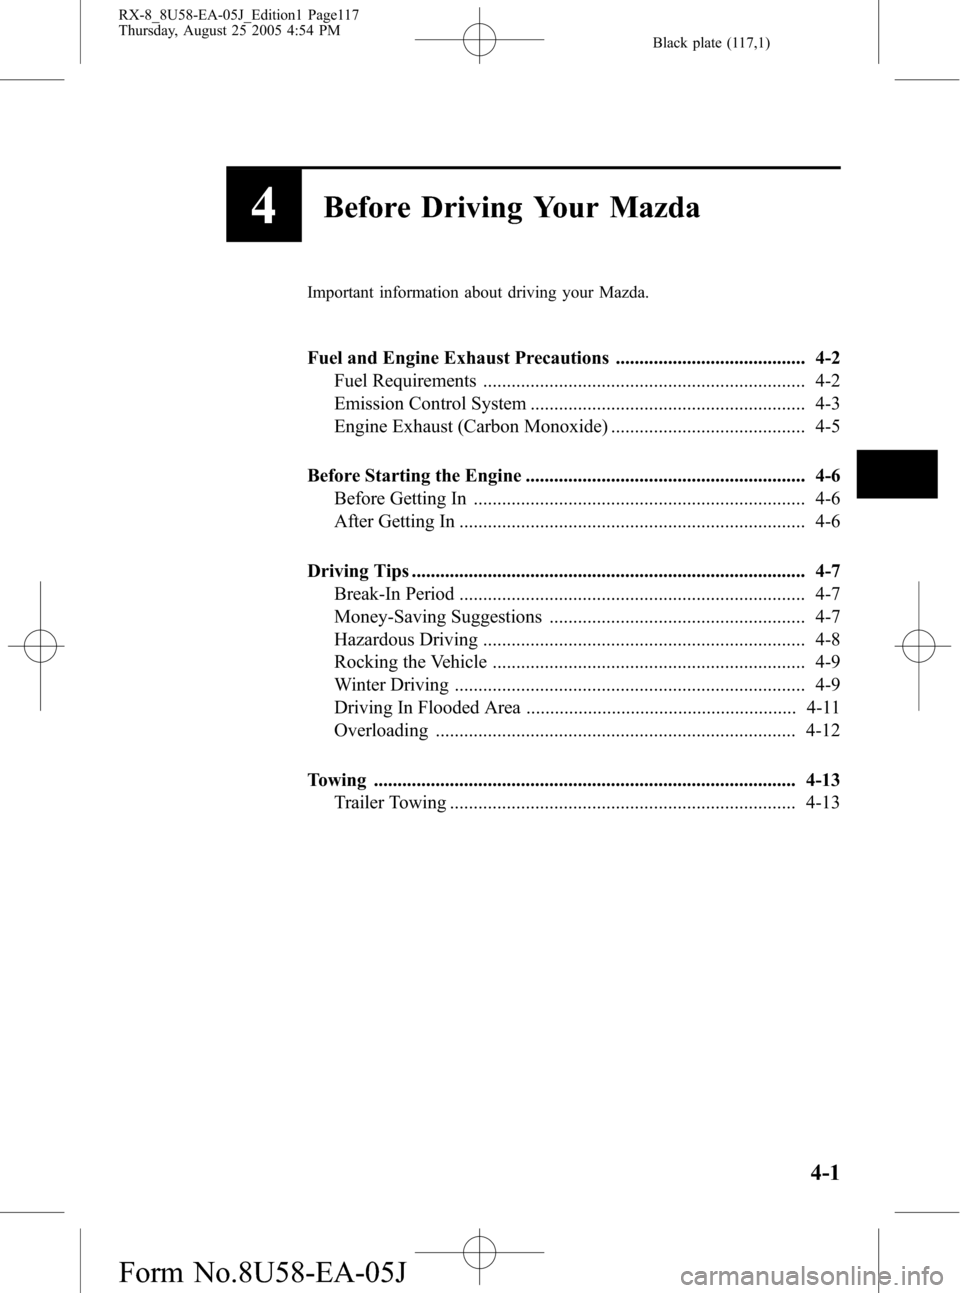 MAZDA MODEL RX 8 2006  Owners Manual (in English) Black plate (117,1)
4Before Driving Your Mazda
Important information about driving your Mazda.
Fuel and Engine Exhaust Precautions ........................................ 4-2
Fuel Requirements ......